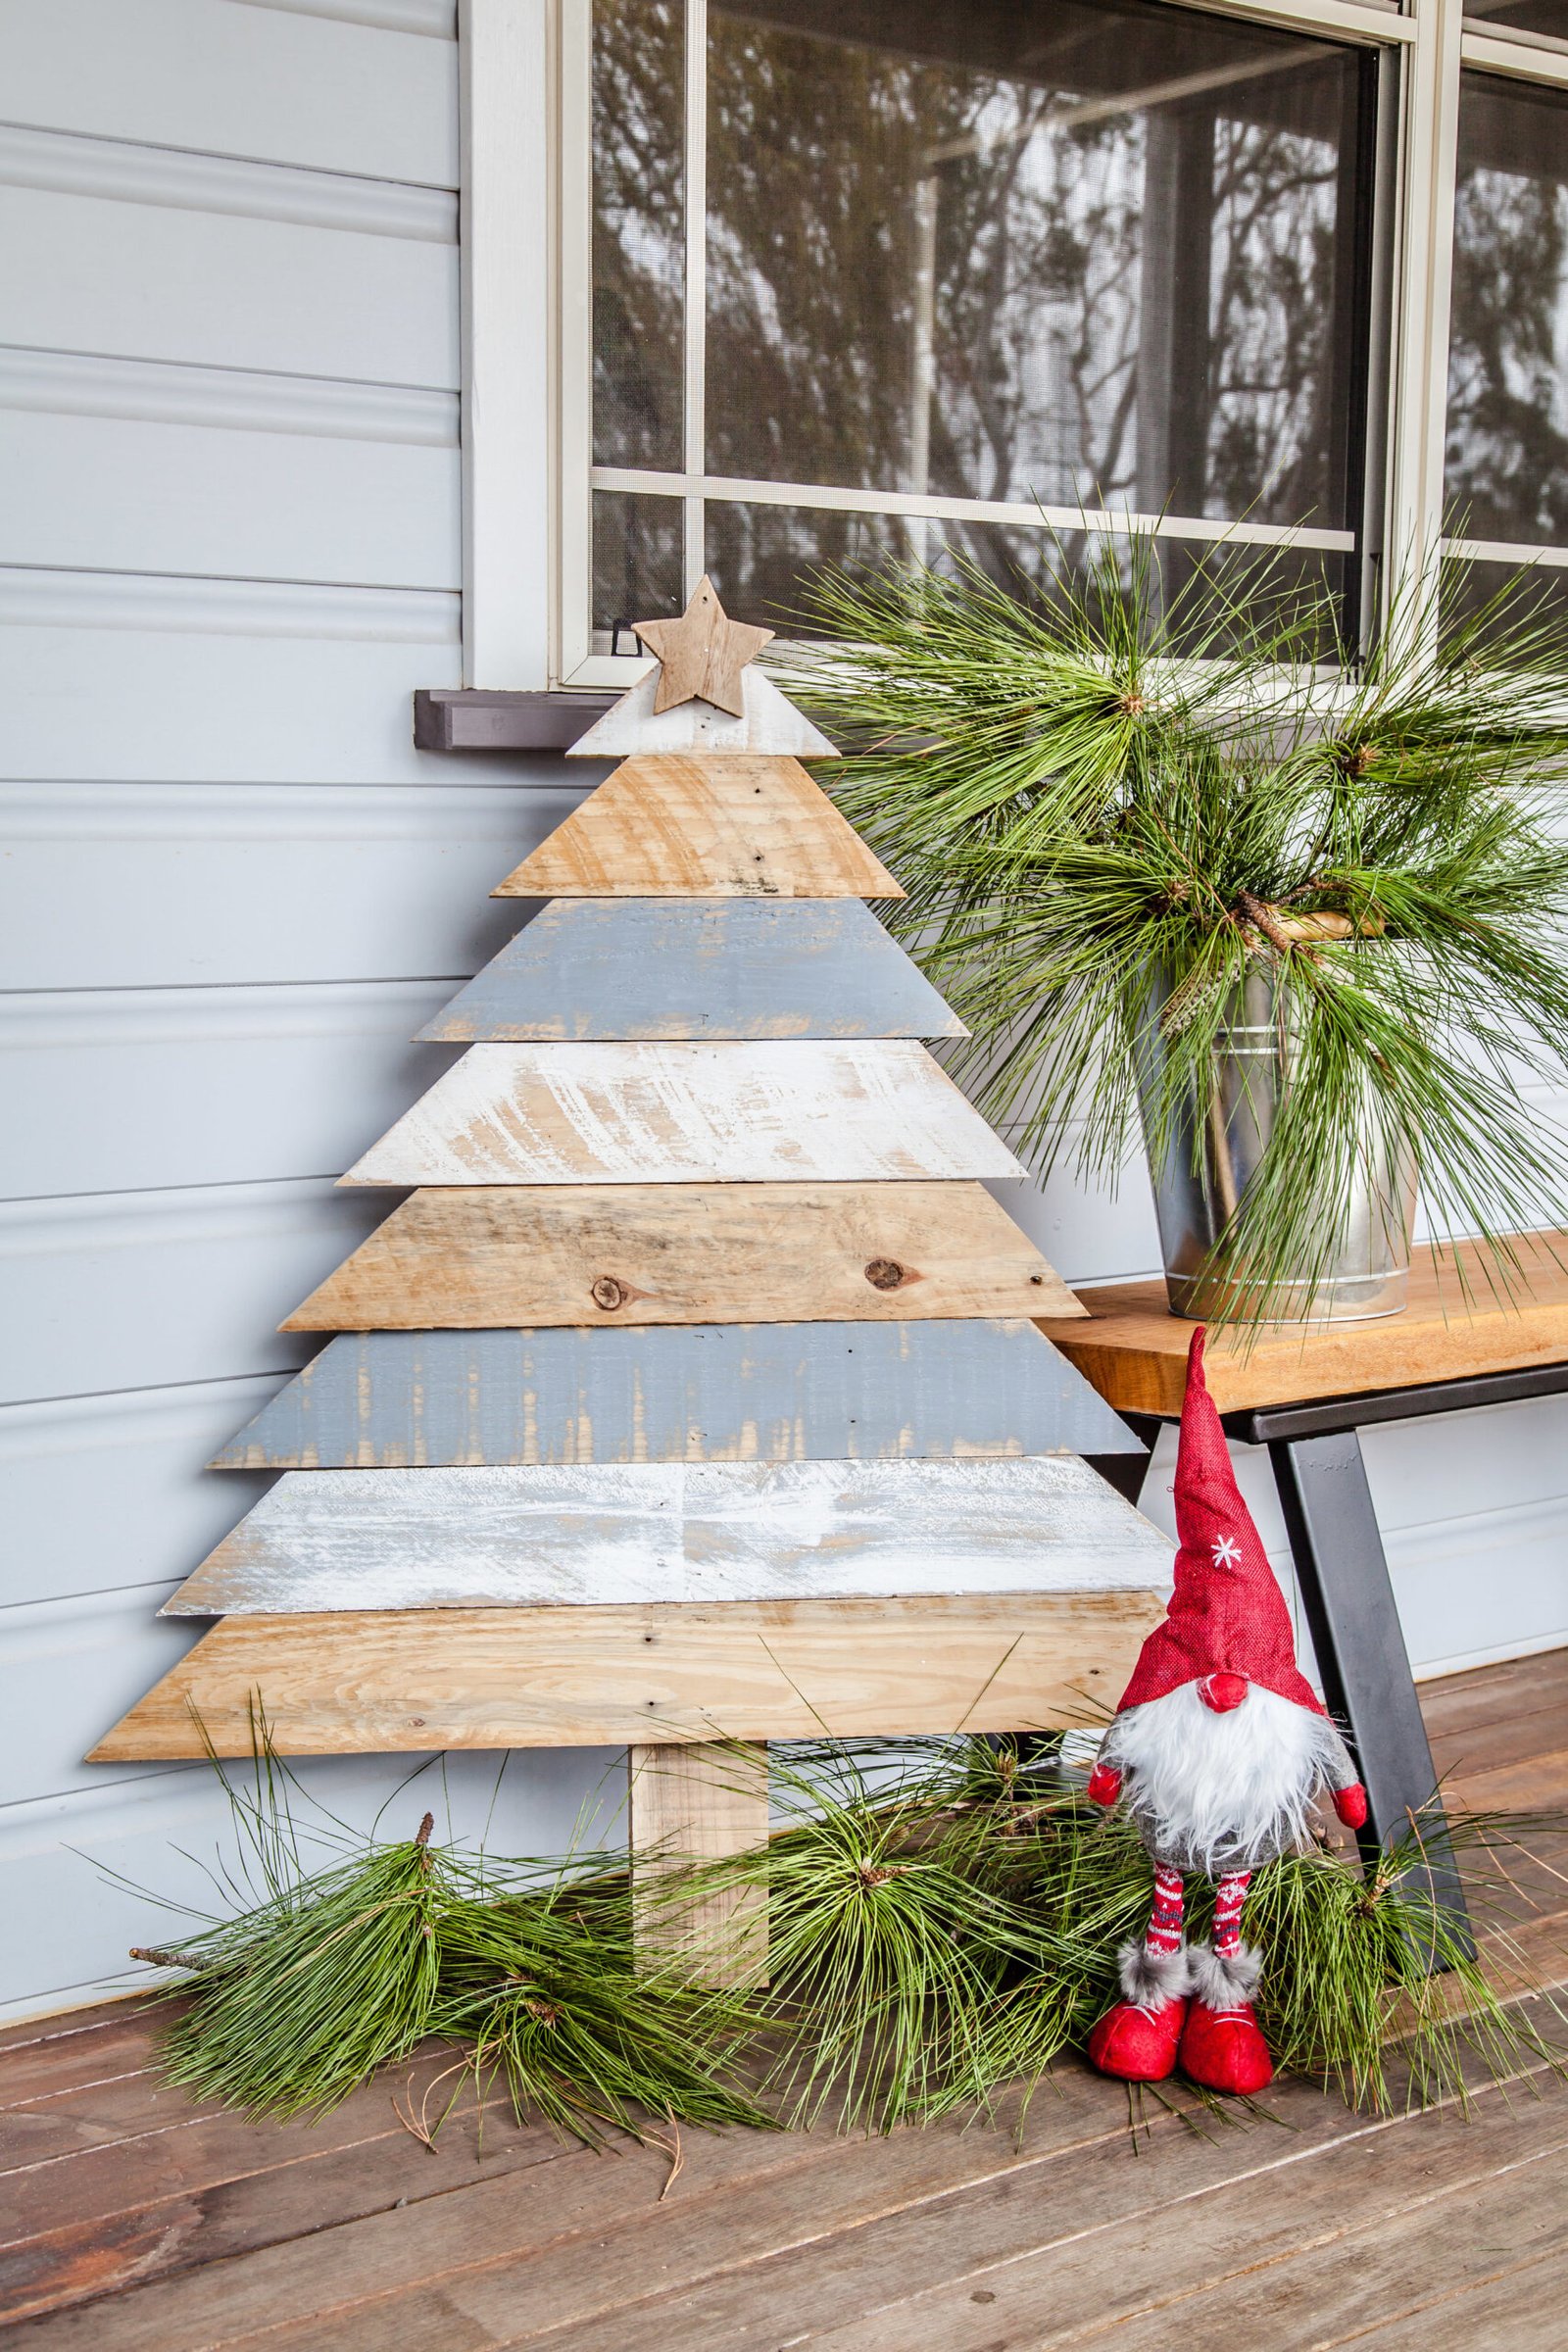 A festive Pallet Tree adorned with pine cones and a gnome, bringing the holiday spirit to life.